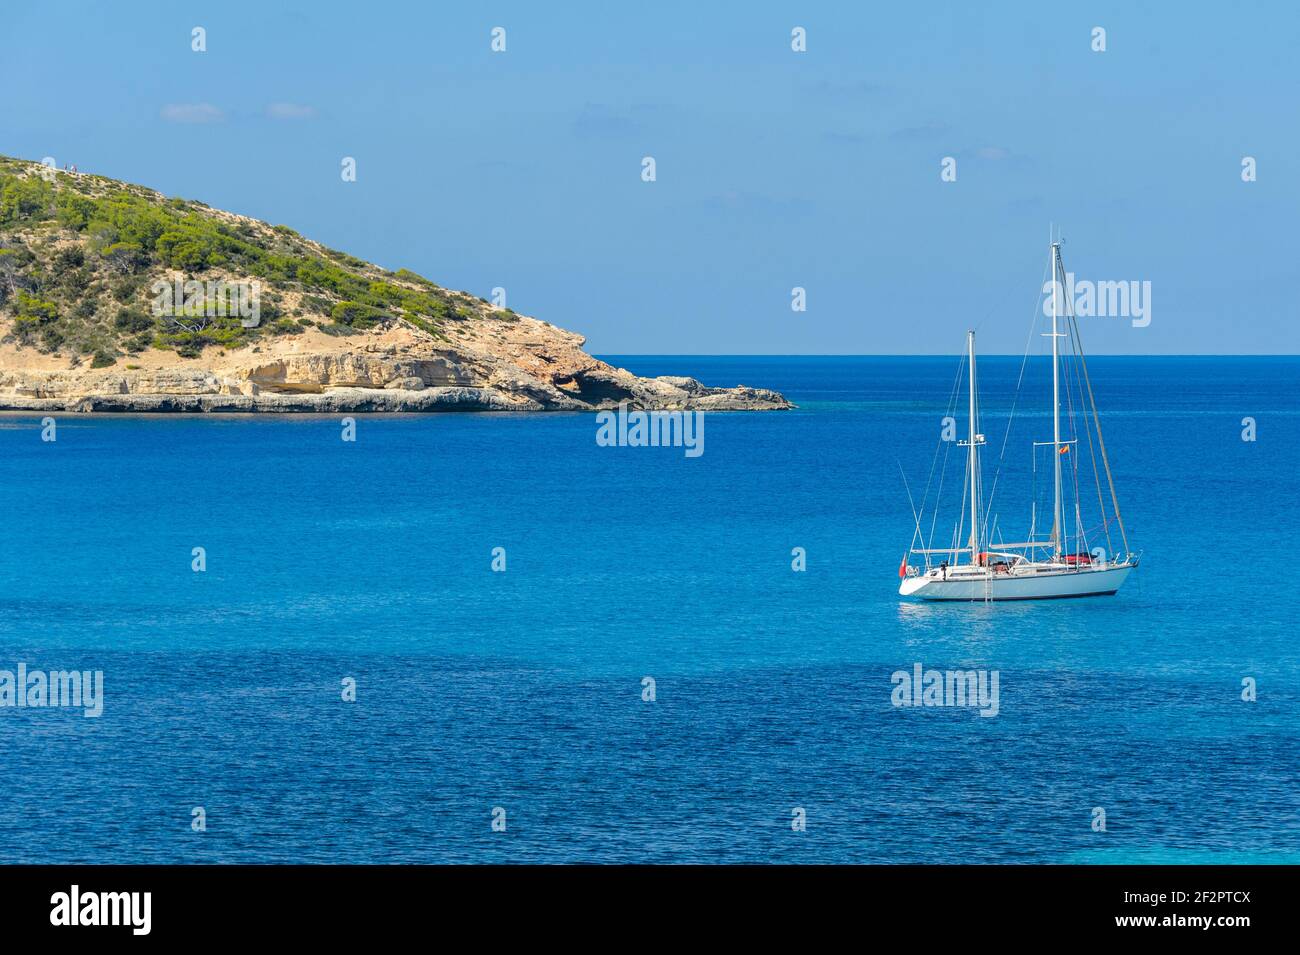 Ibiza, Spain - September 27, 2017: Cala Xarraca beach on the north coast of the island of Ibiza. Crystal clear waters on this almost wild beach, where Stock Photo